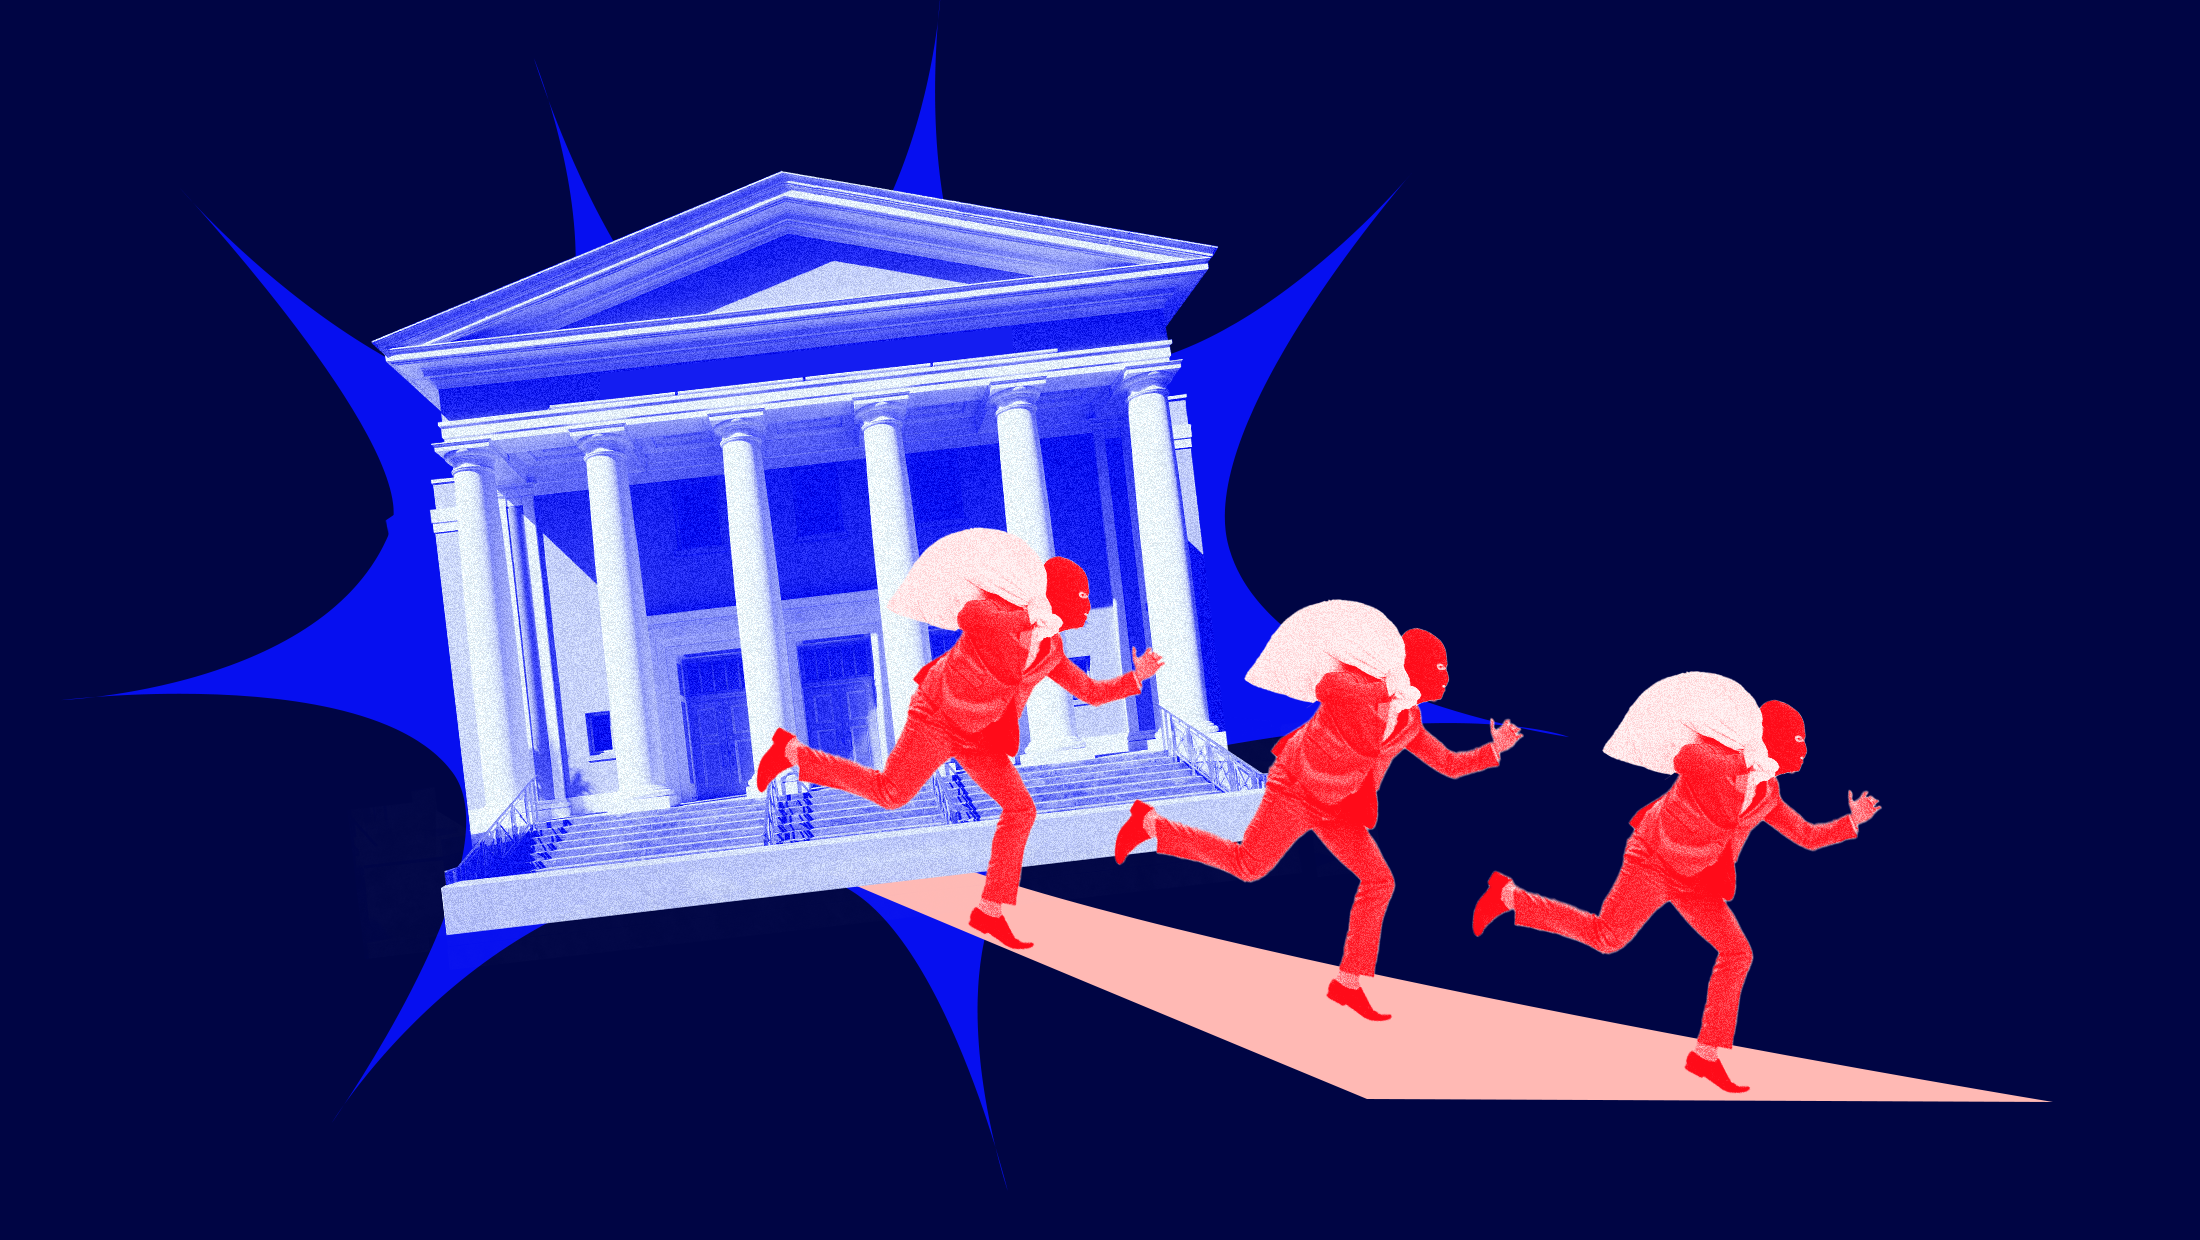 Dark blue background with image of the U.S. Supreme Court and three red-toned people in masks holding white bags over their shoulders and running away.